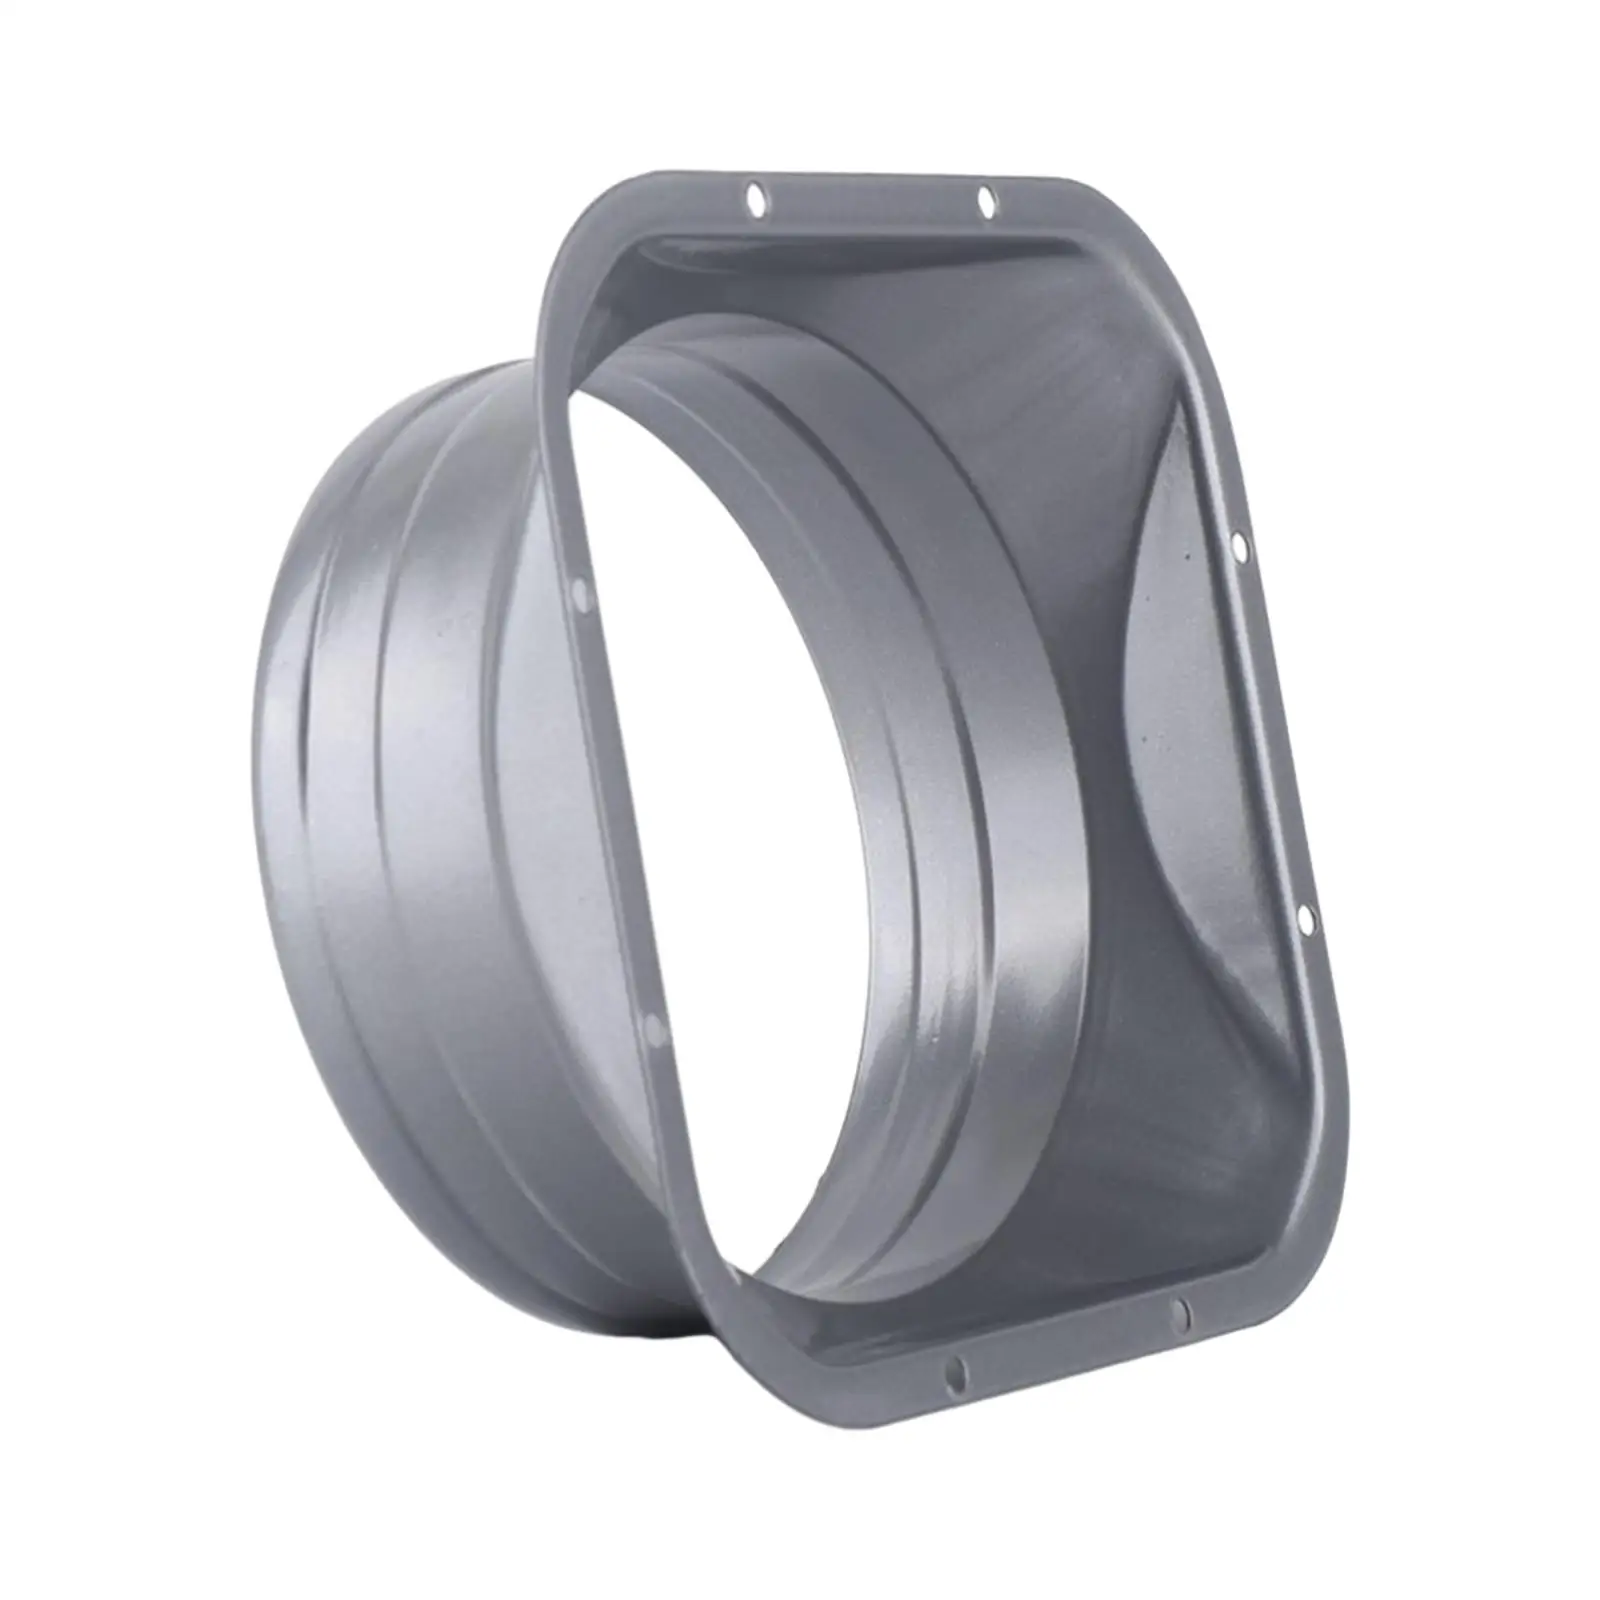 Air Vent Duct Connector Straight Ventilation Pipe Ducting Connector Duct Connector Flange Replacement Easy Installation Durable